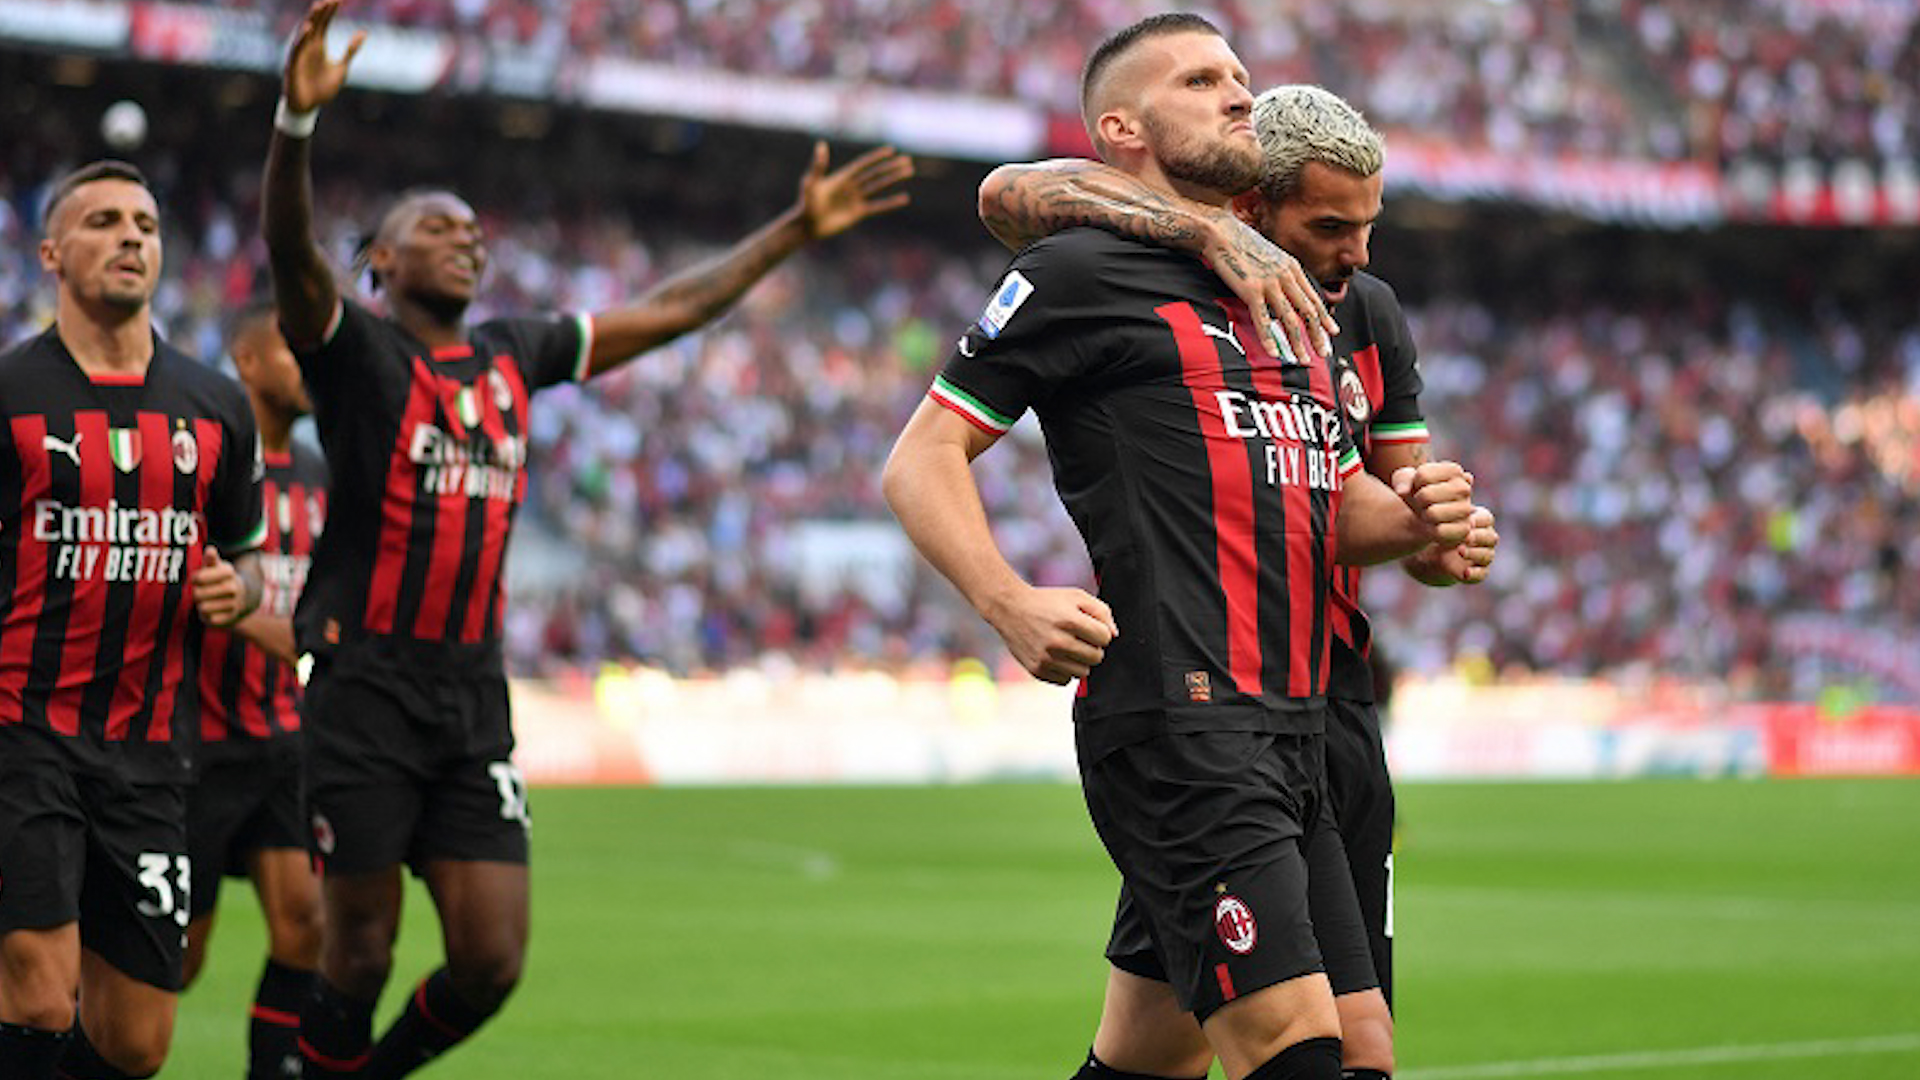 HIGHLIGHT SERIE A AC MILAN VS UDINESE 4-2